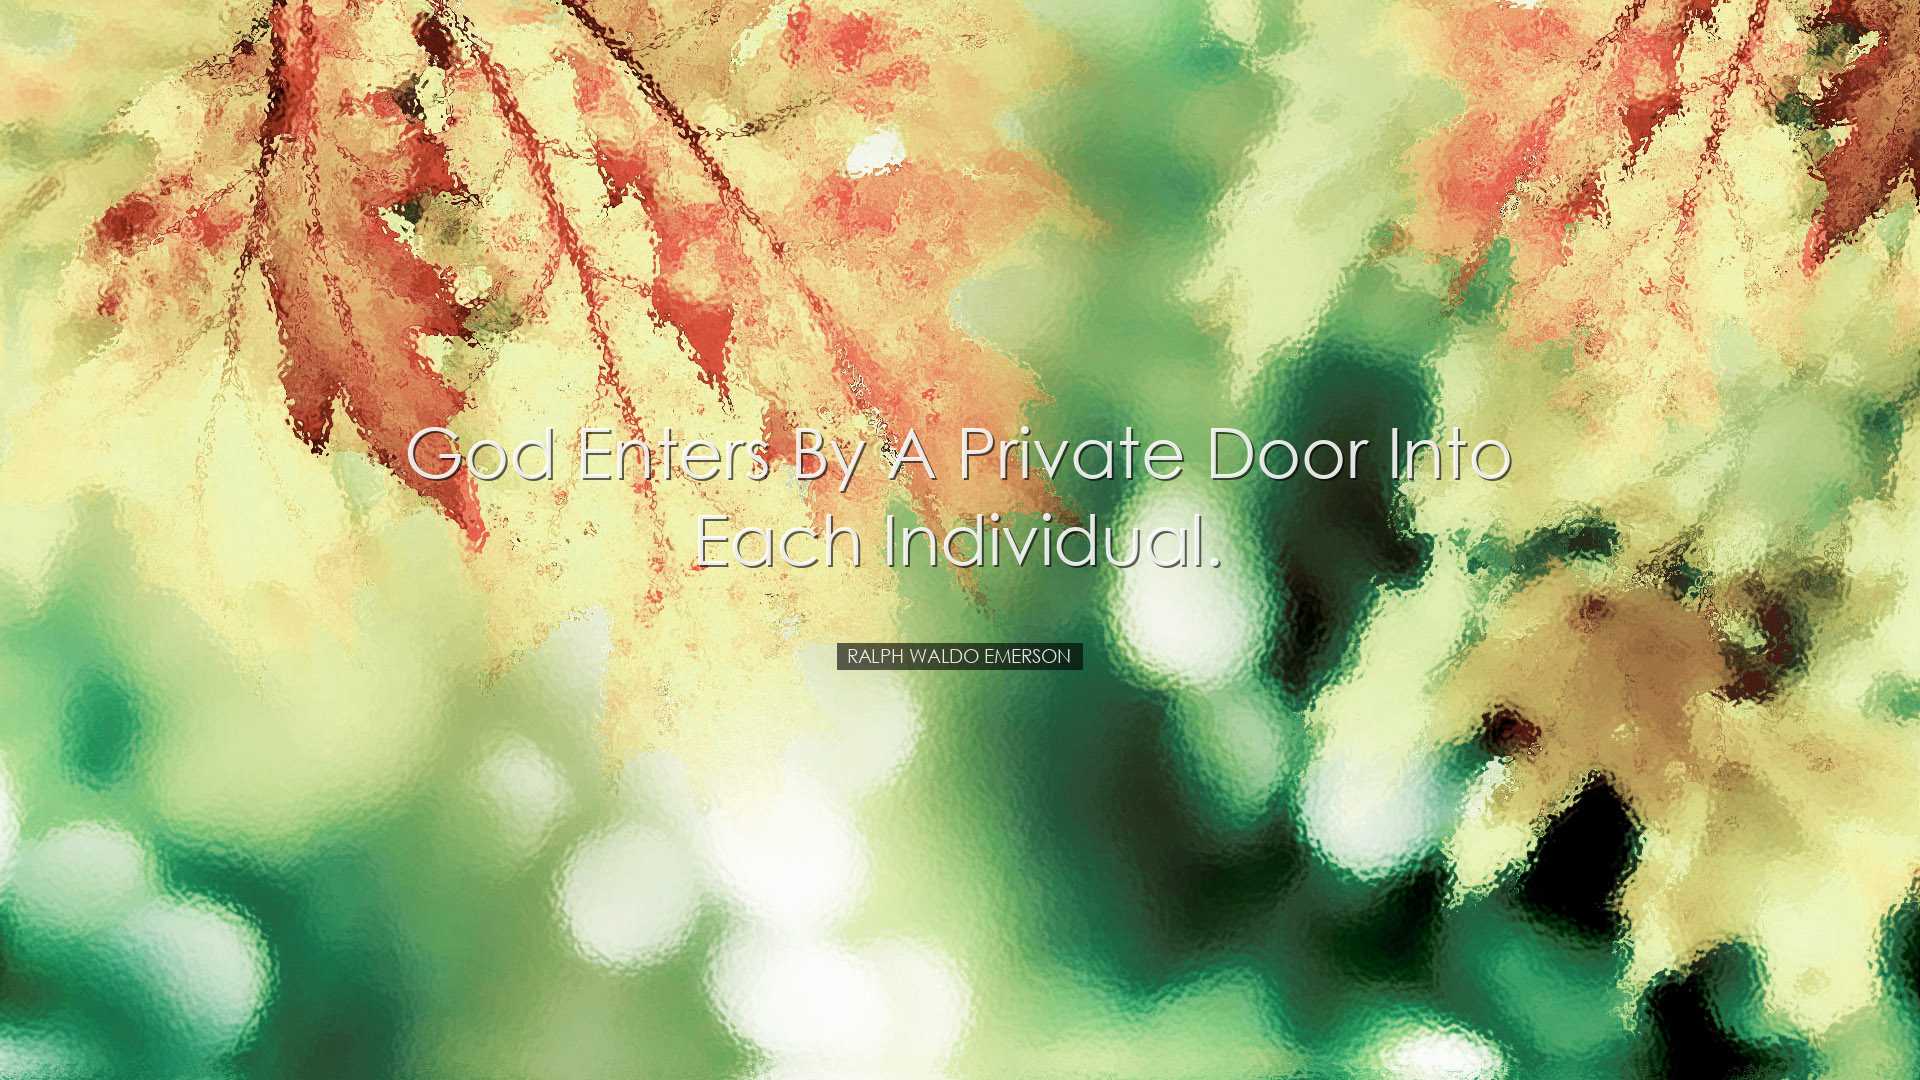 God enters by a private door into each individual. - Ralph Waldo E